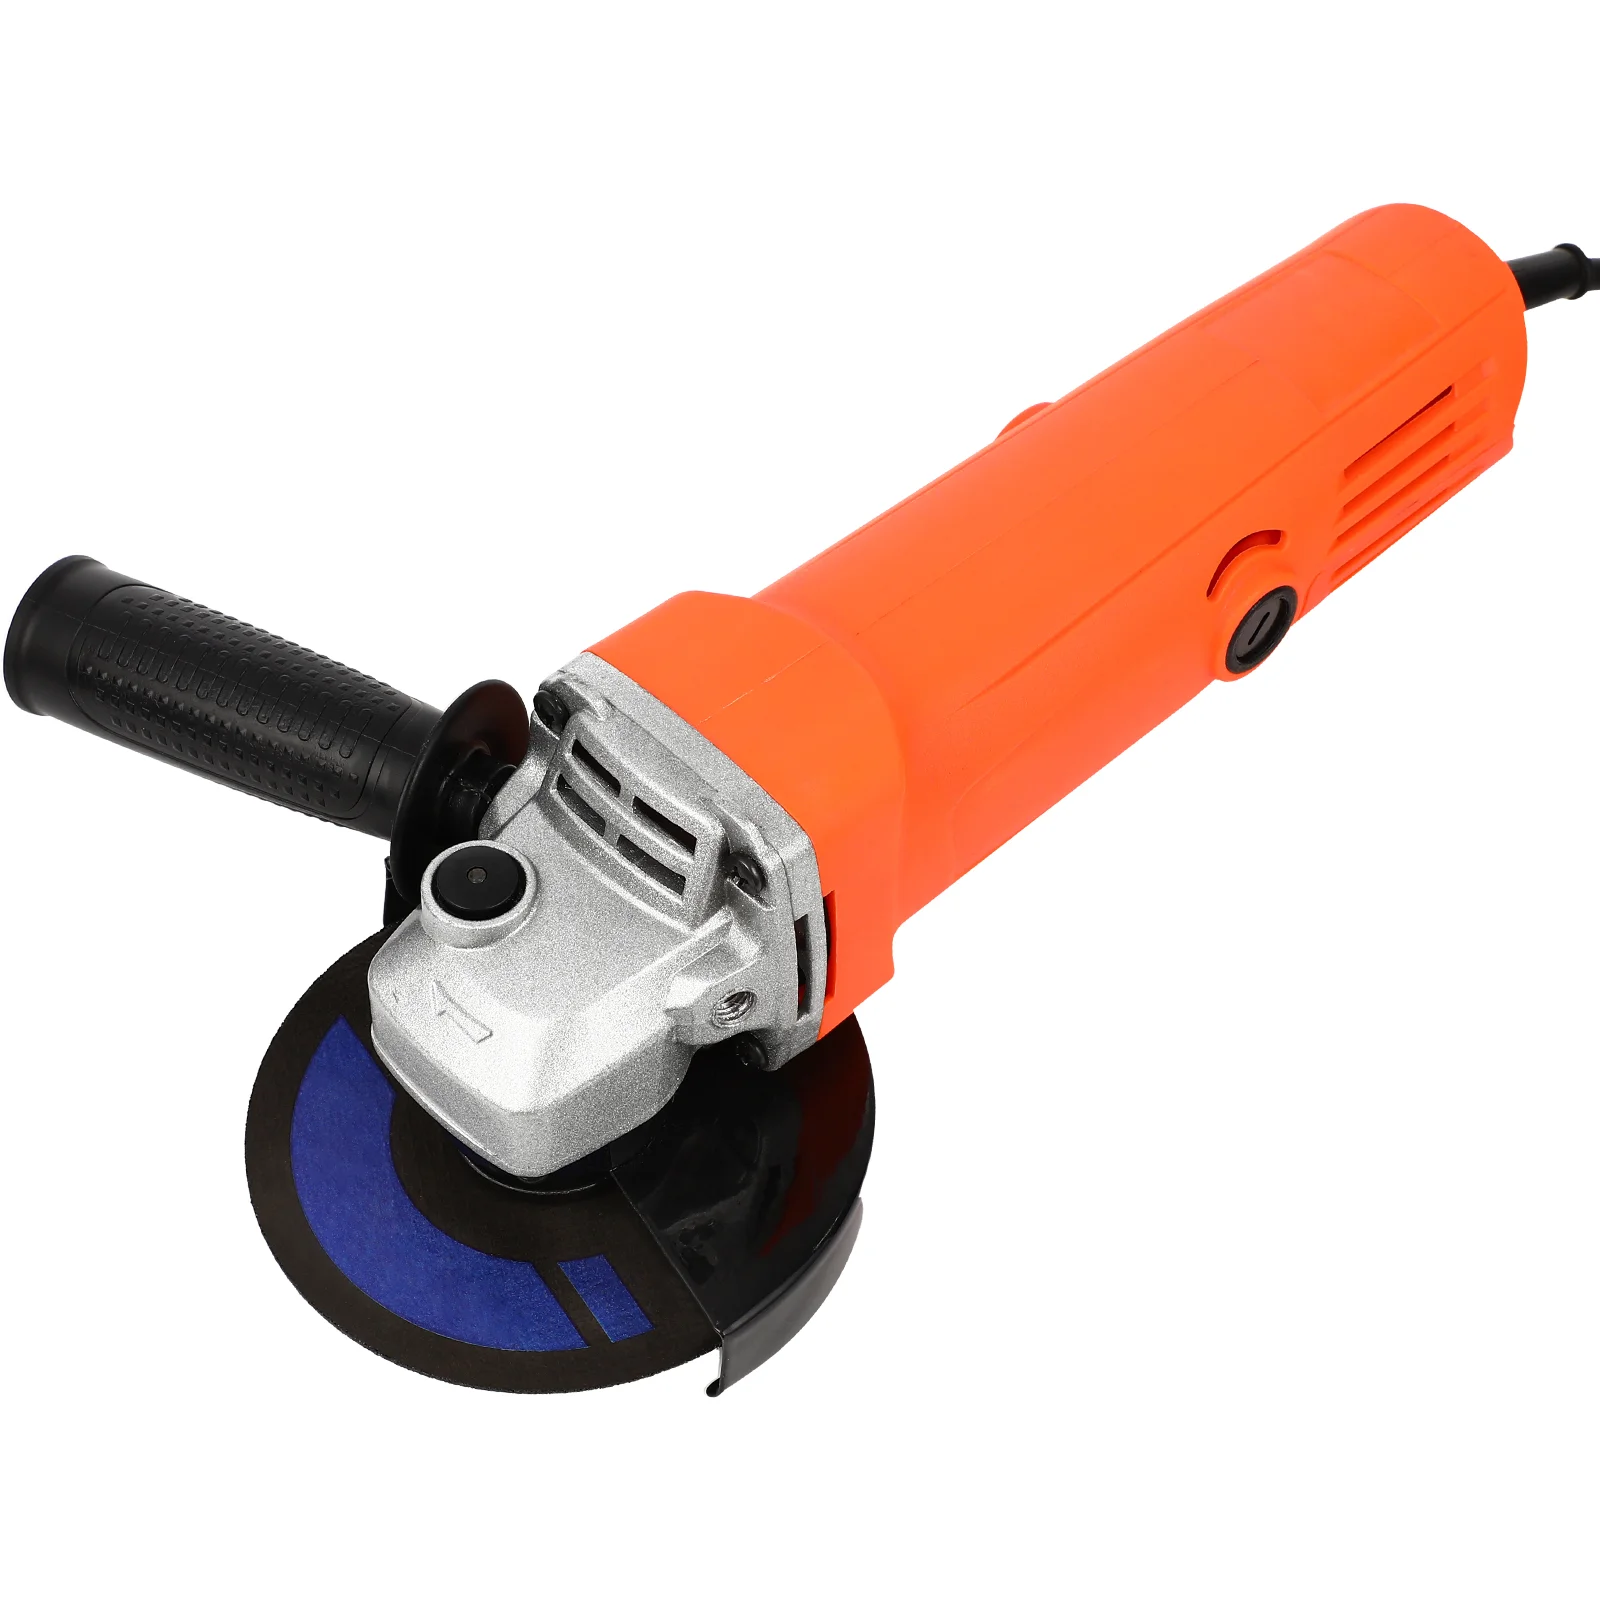 

Handheld Electric Angle Grinder with Grinding Wheels for Grinding Woodwork with UK Plug